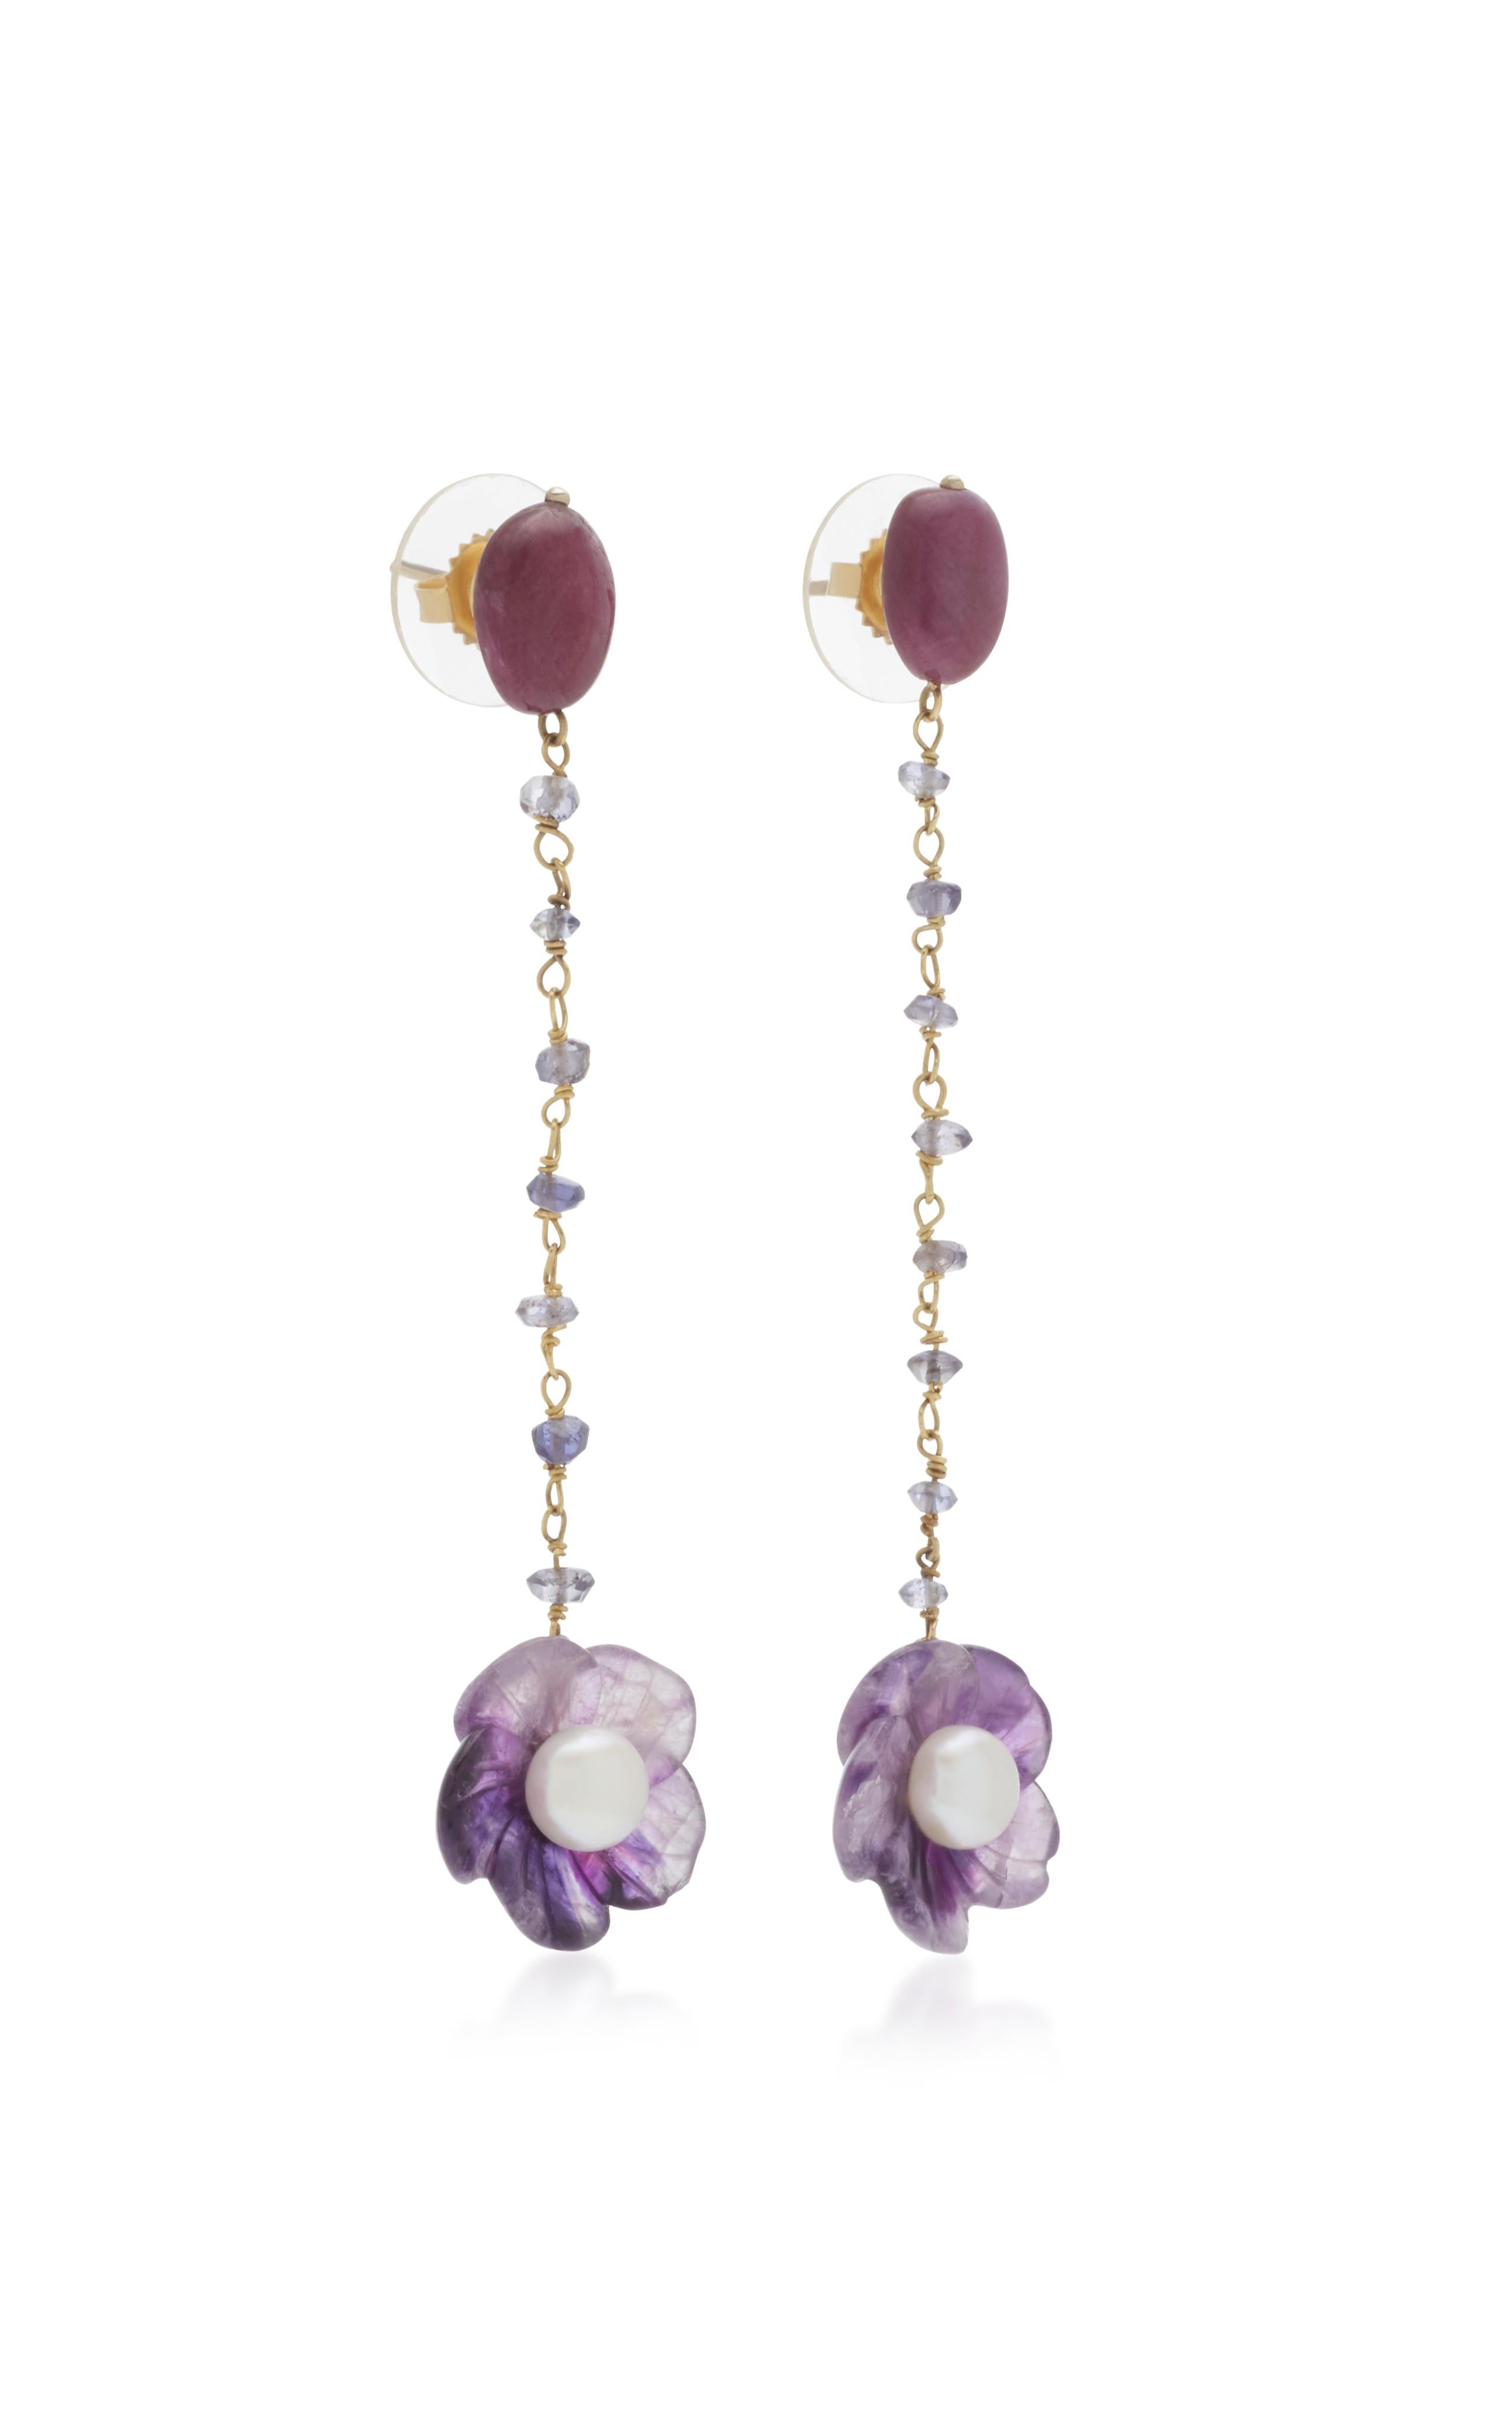 A pair of Ruby nugget Earrings with posts & Iolite bead chain with a carved Amethyst flower dangle with Pearl center. Set in 18 karat gold, signed Sorab & Roshi. 
3